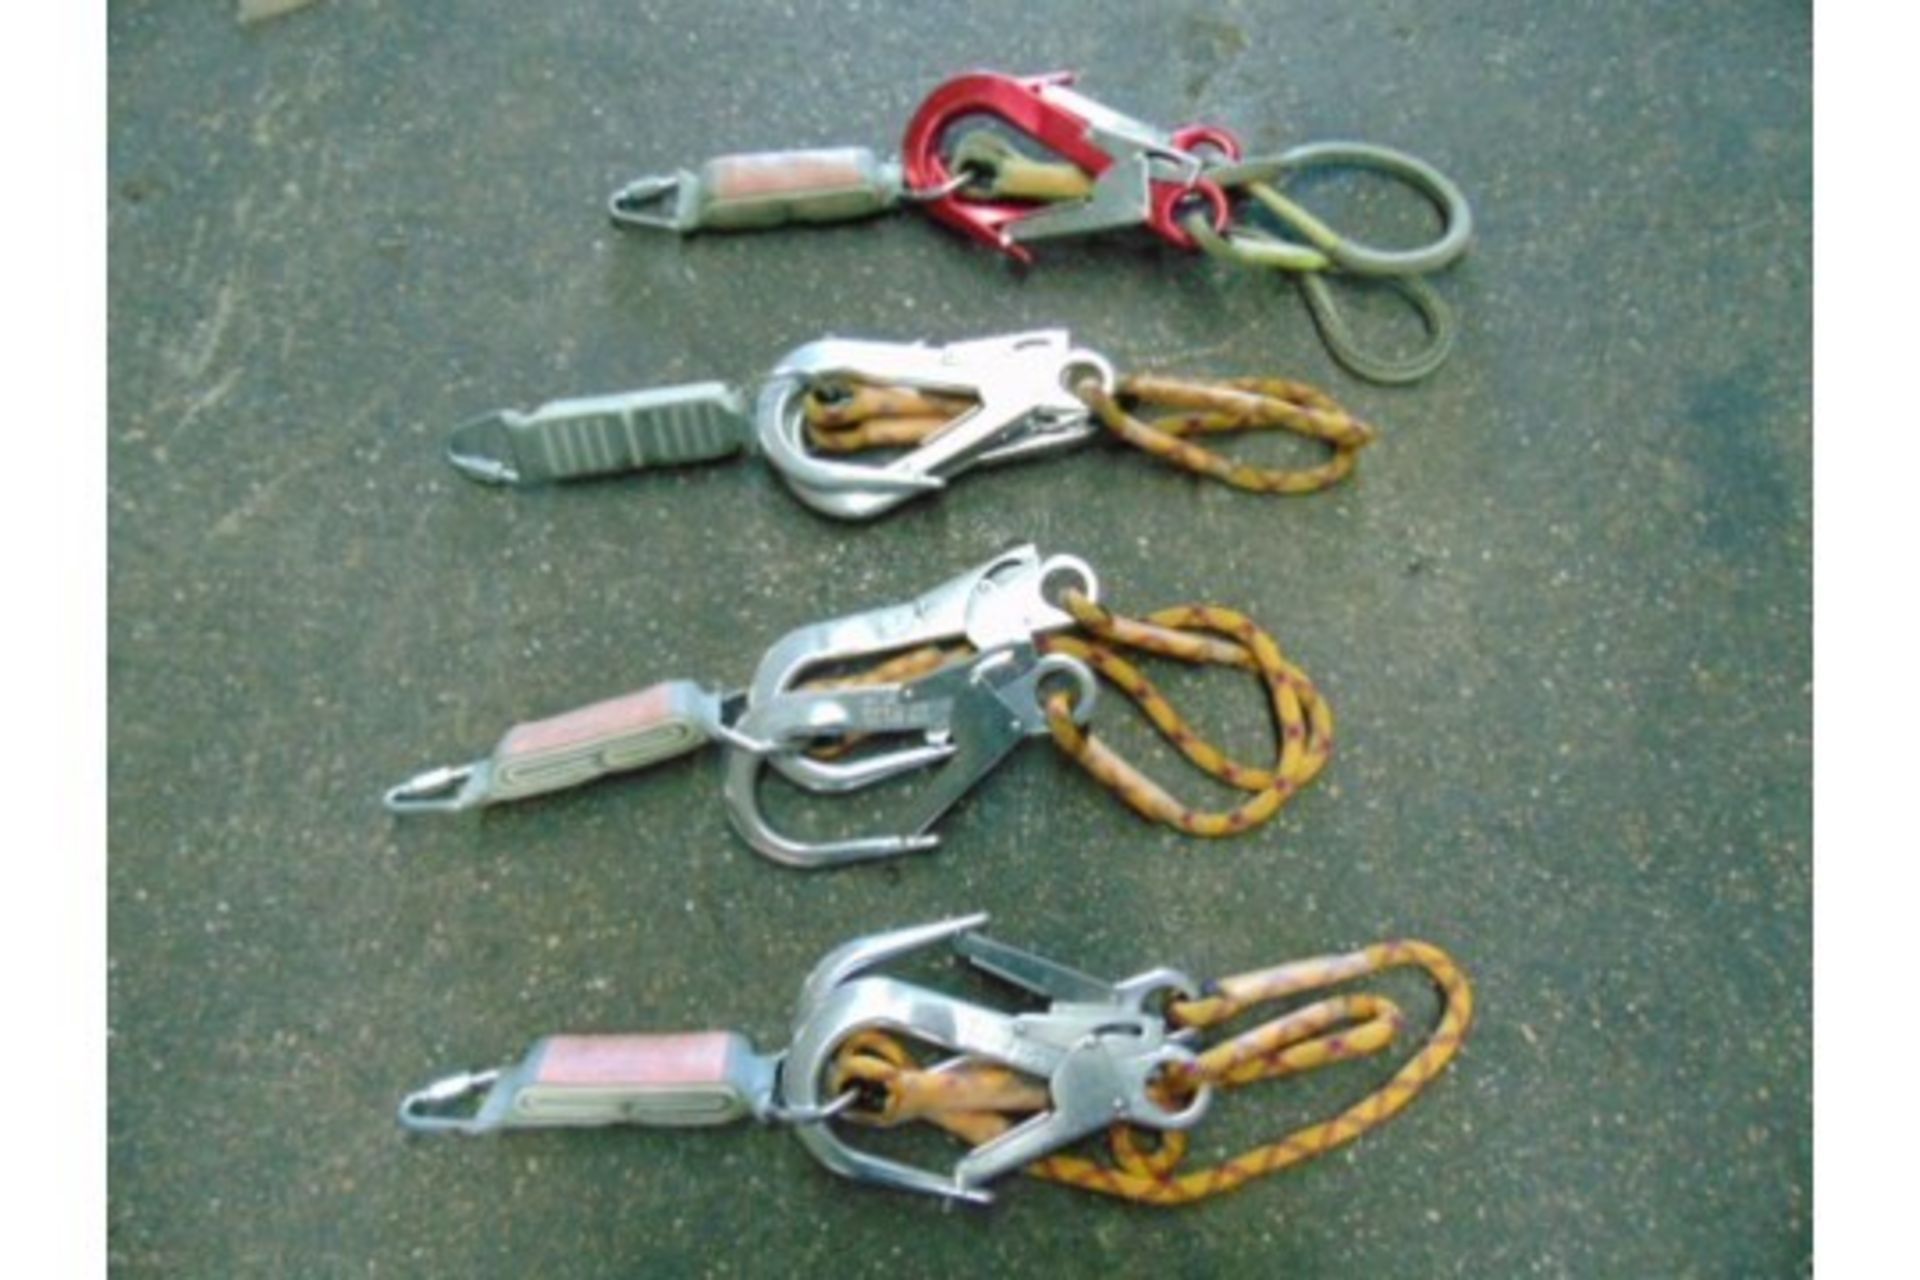 4 x Heightec Twin Fall Arrest Lanyard with Oval Scaff Hooks